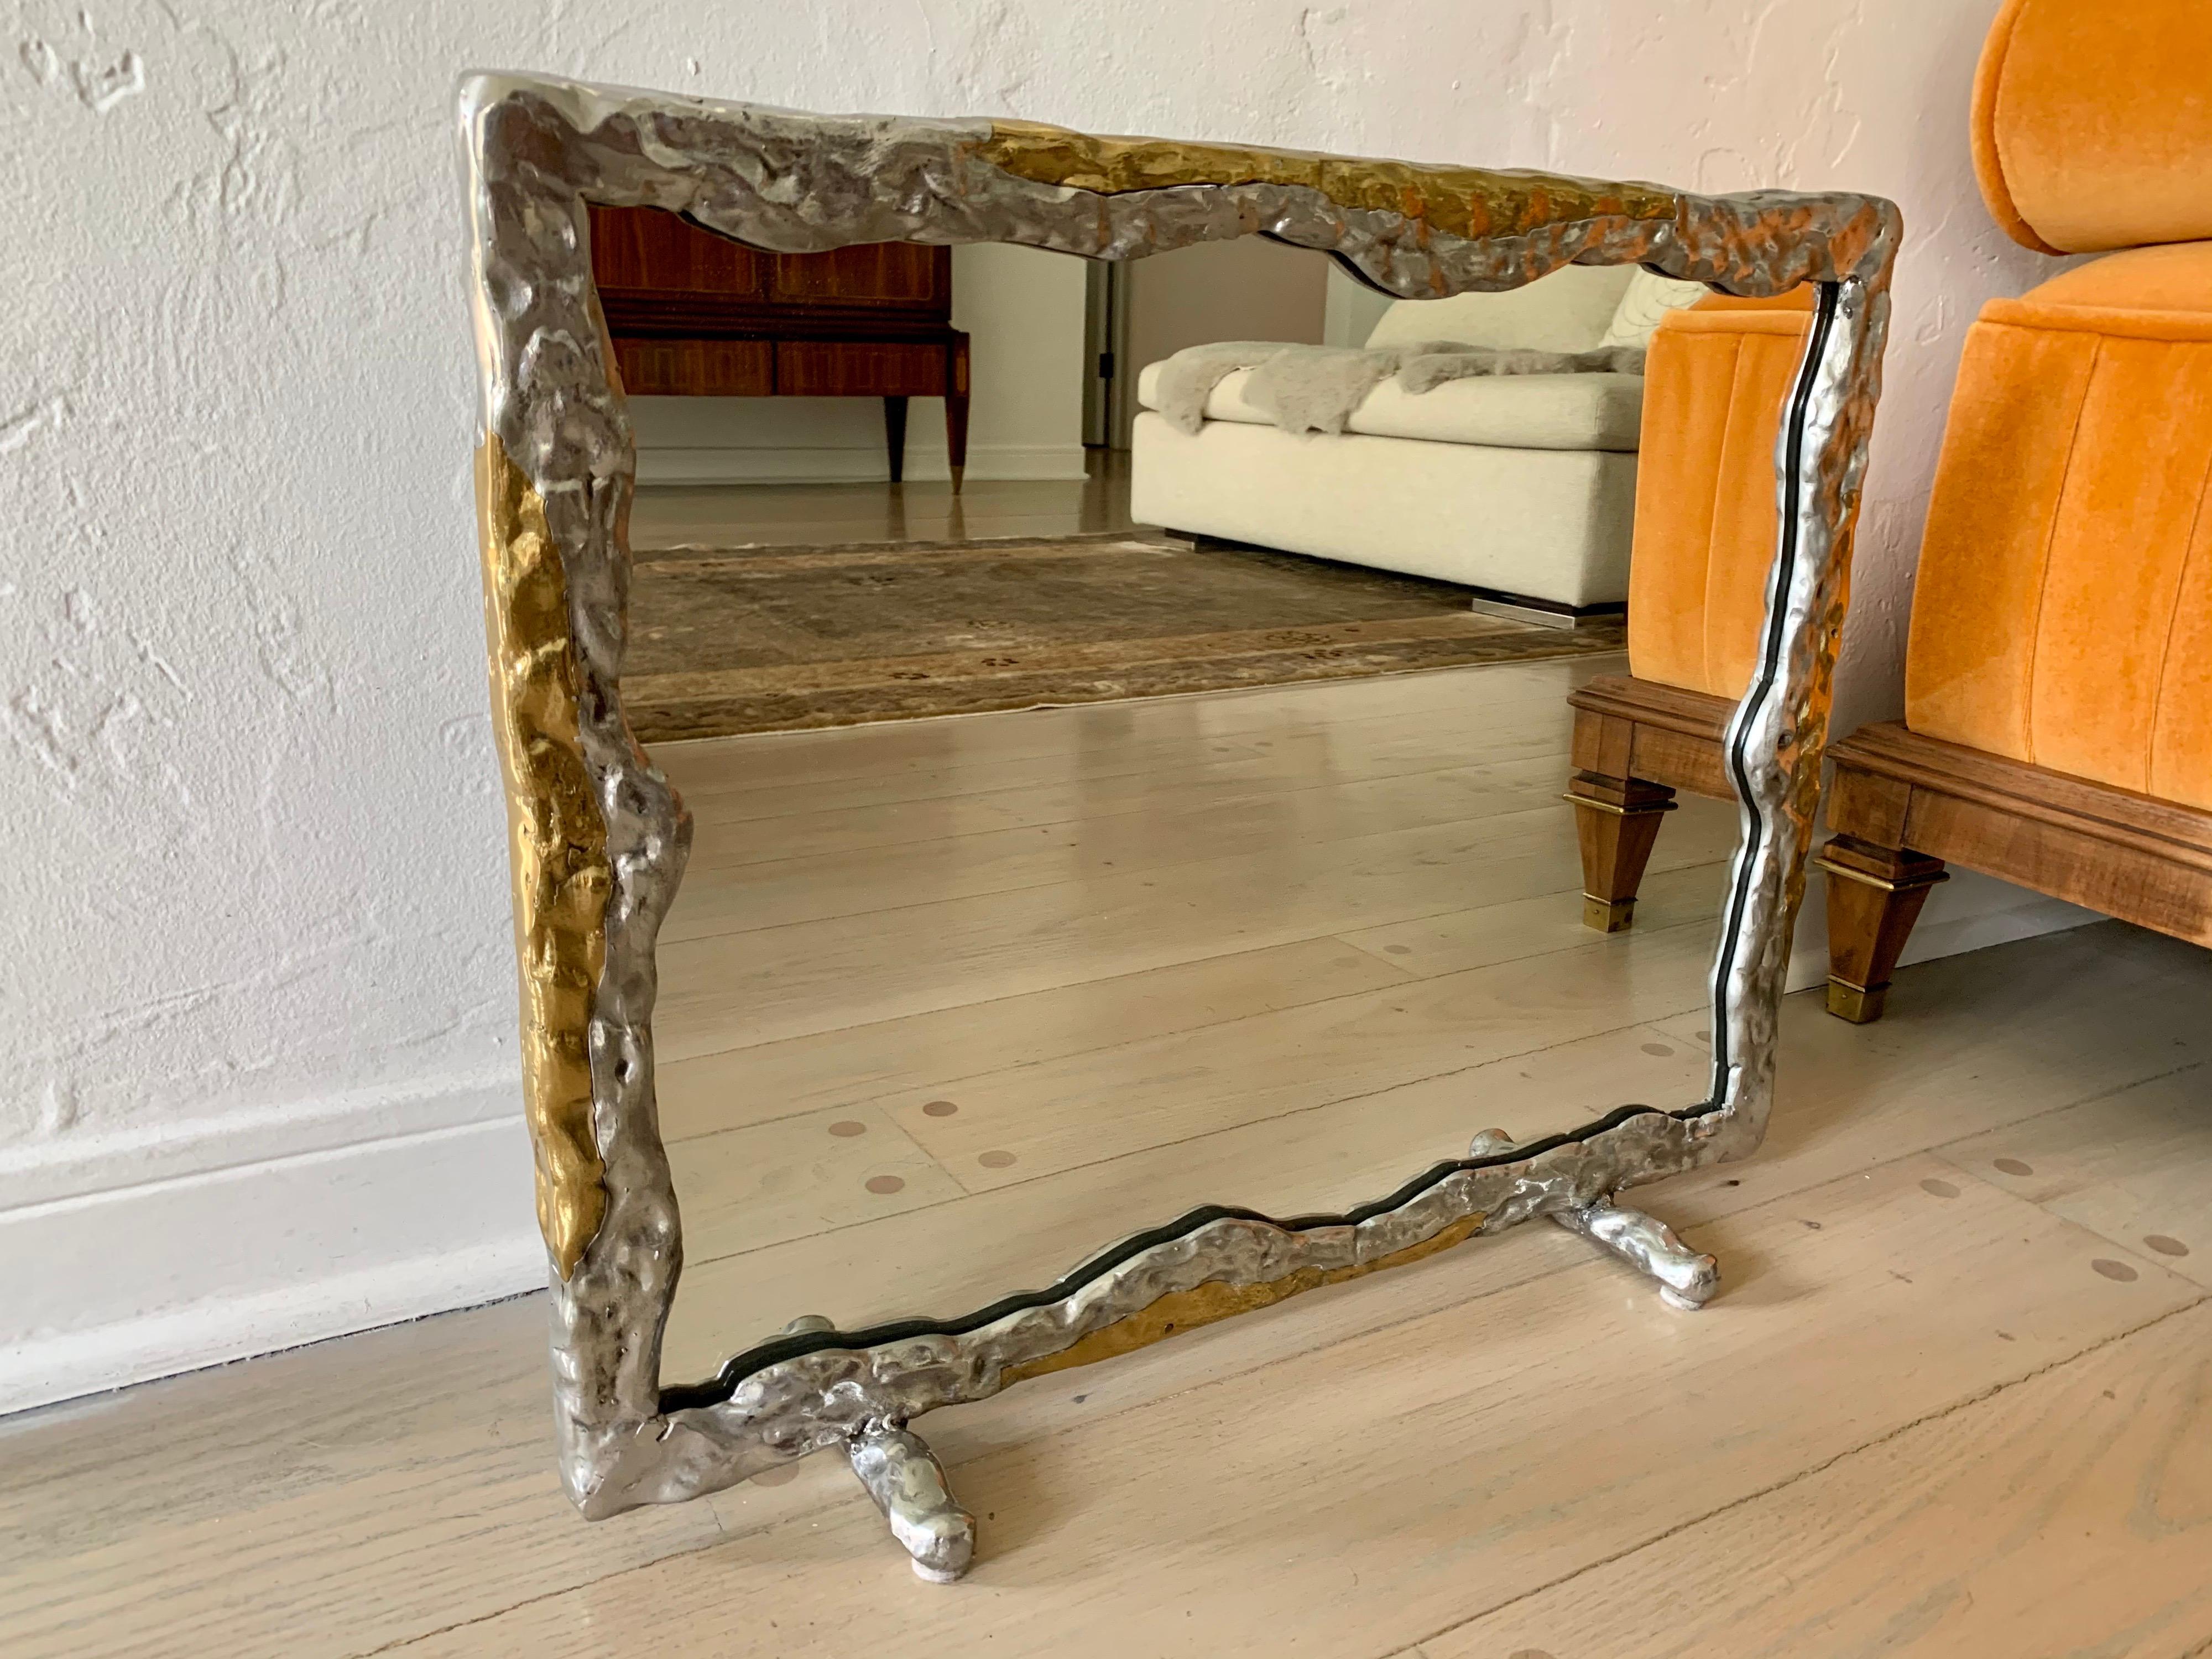 This mixed metal style framed vanity mirror in a brutal design by David Marshall.